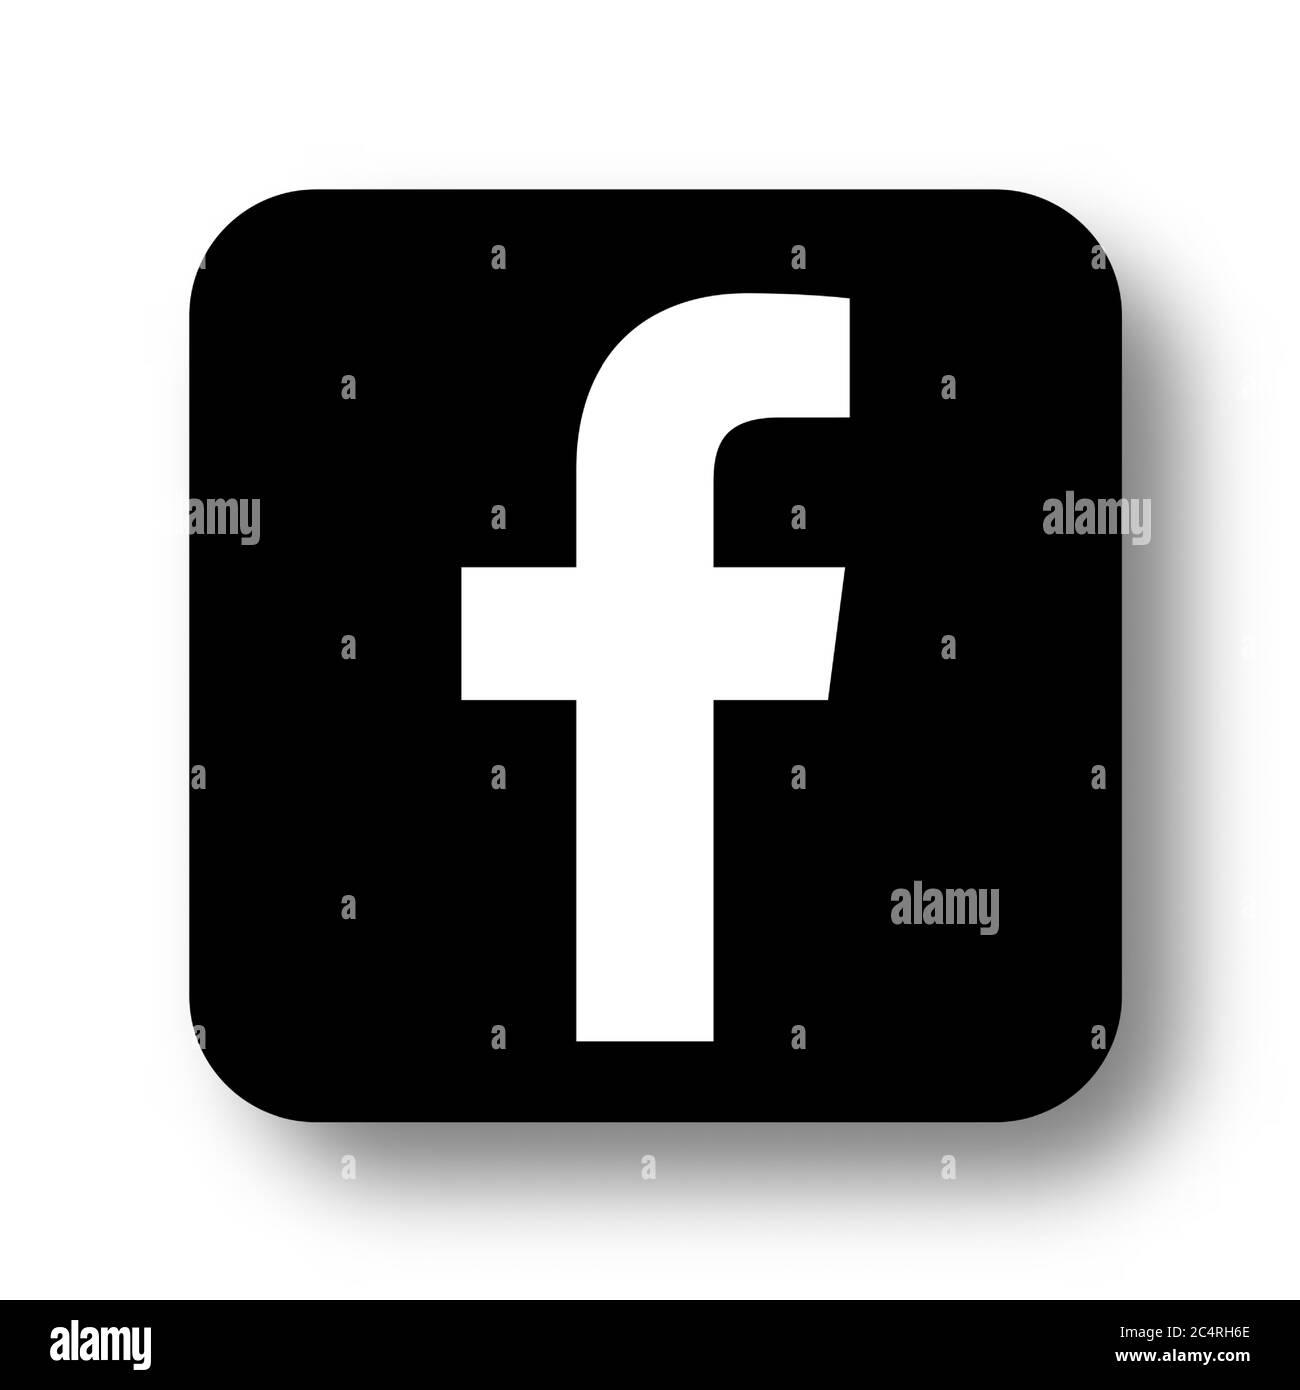 VORONEZH, RUSSIA - JANUARY 31, 2020: Facebook logo black square icon with soft shadow Stock Vector